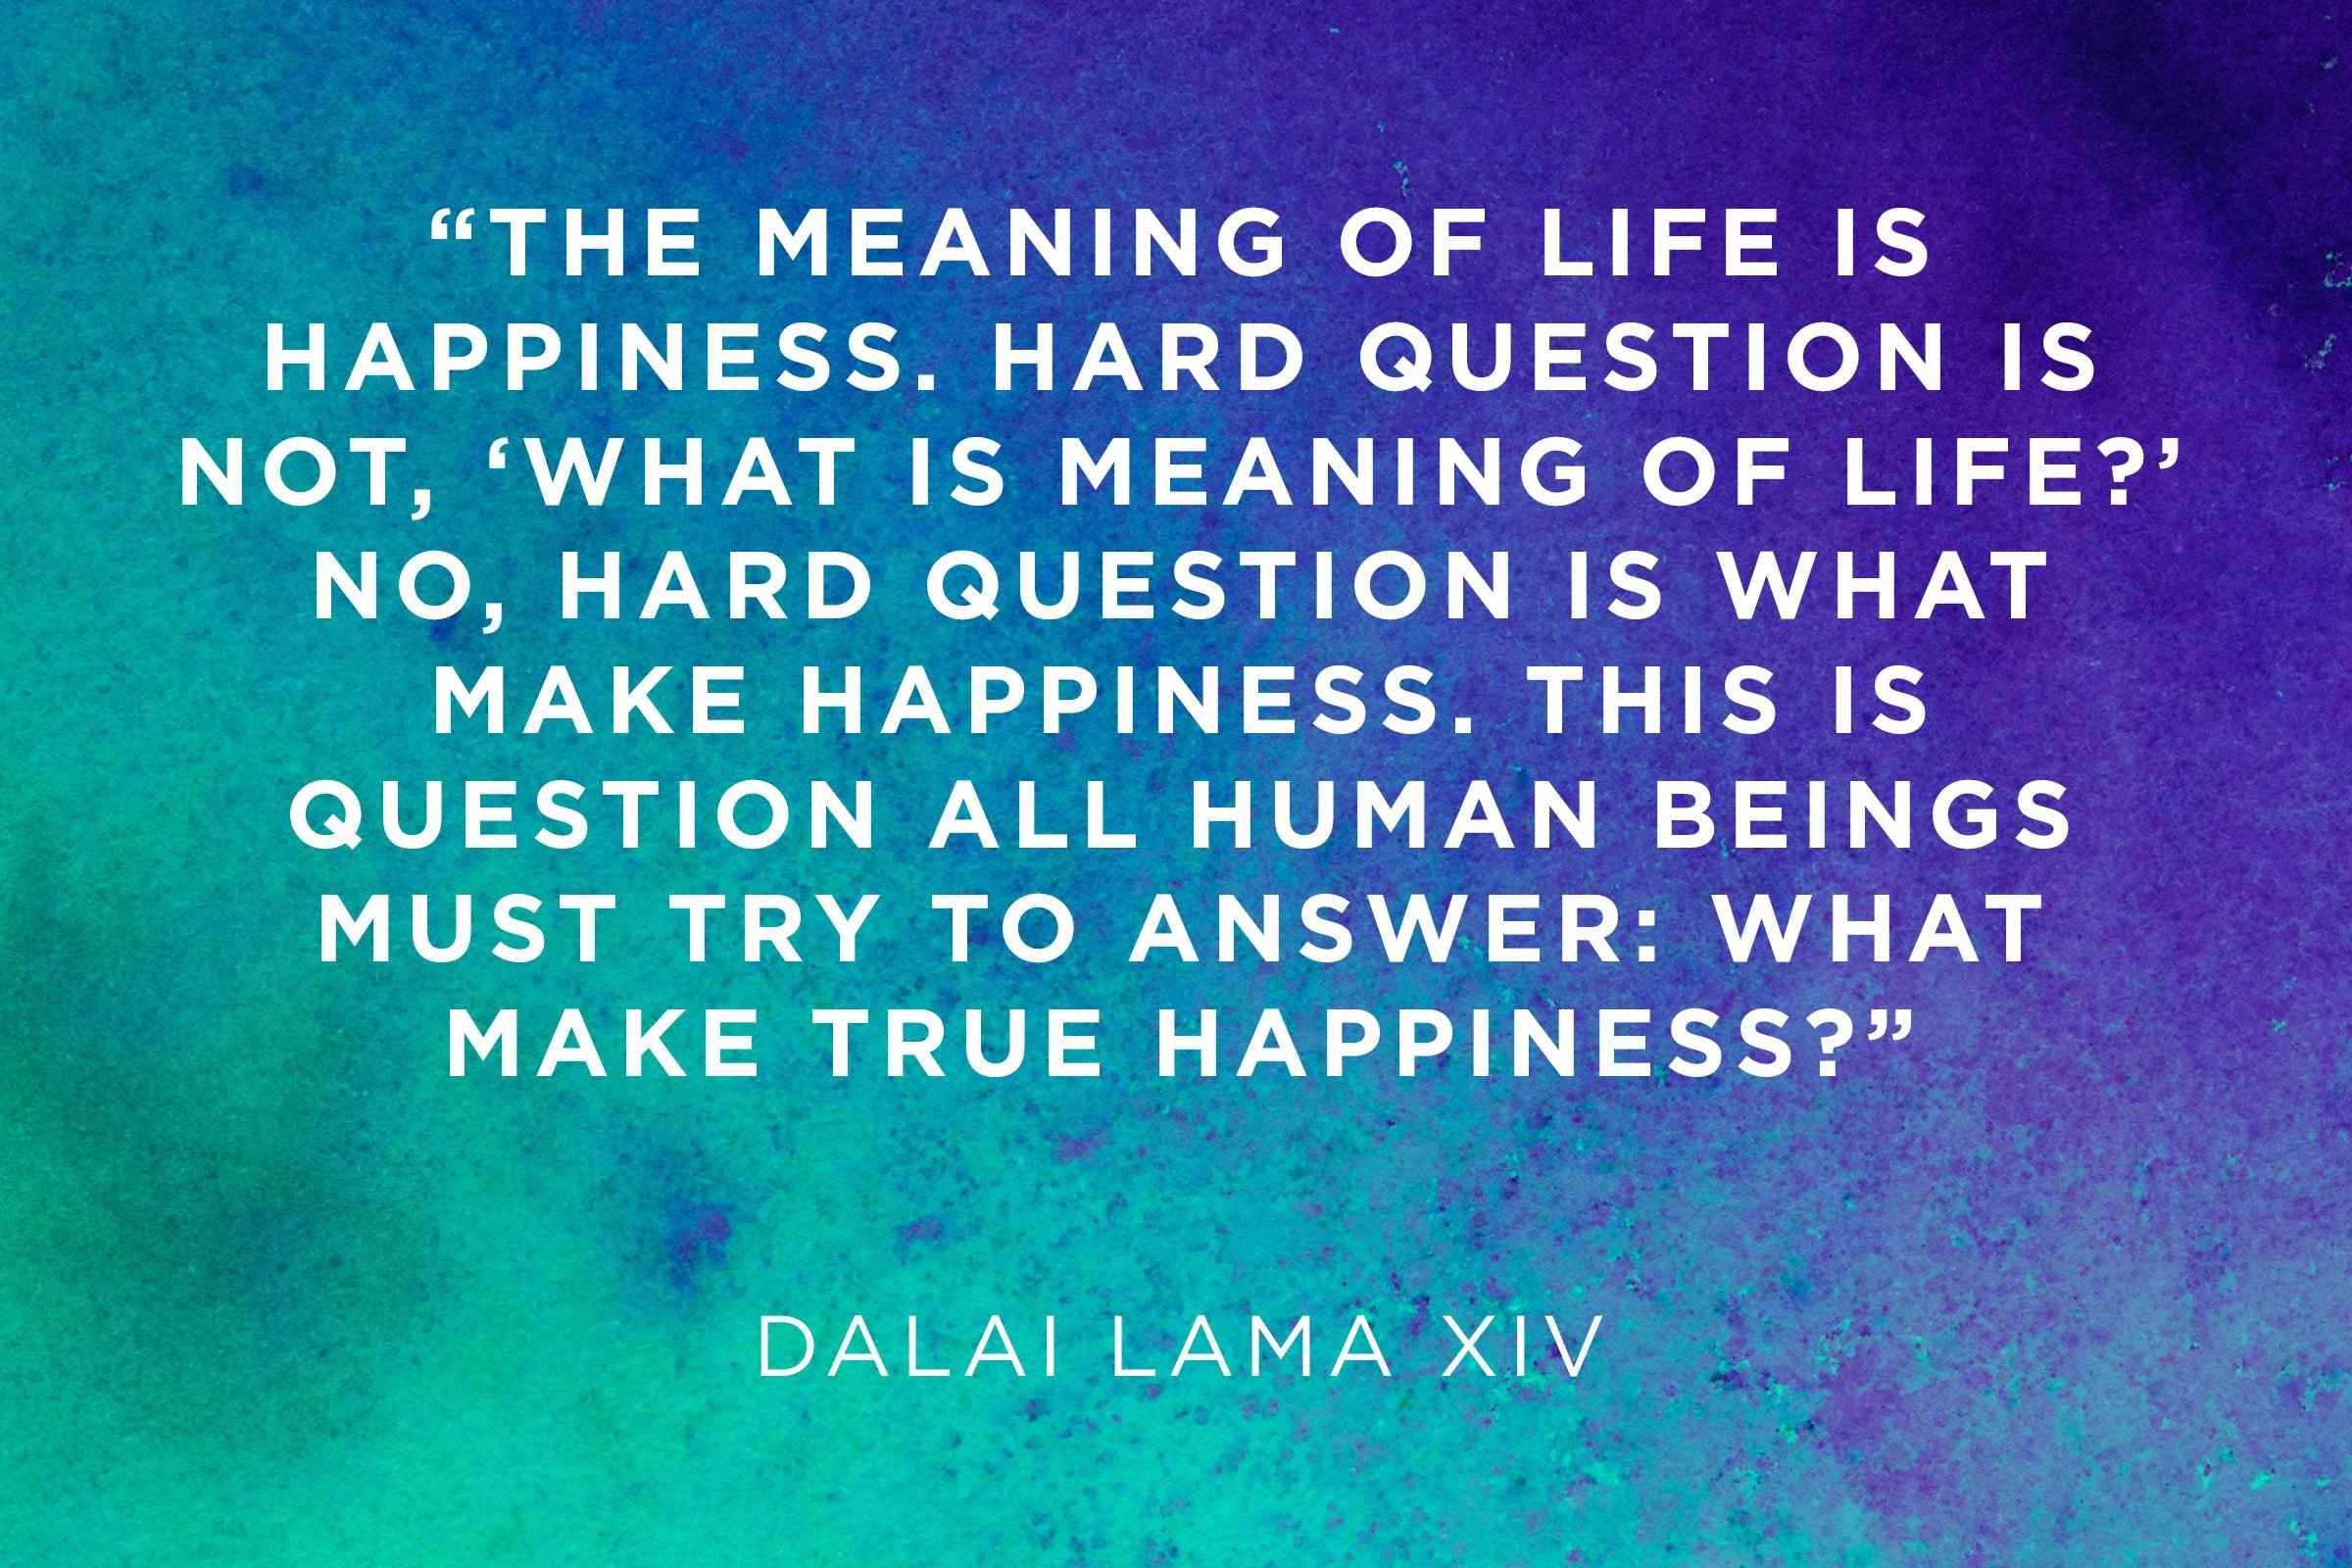 Dalai Lama The meaning of life is the wrong question